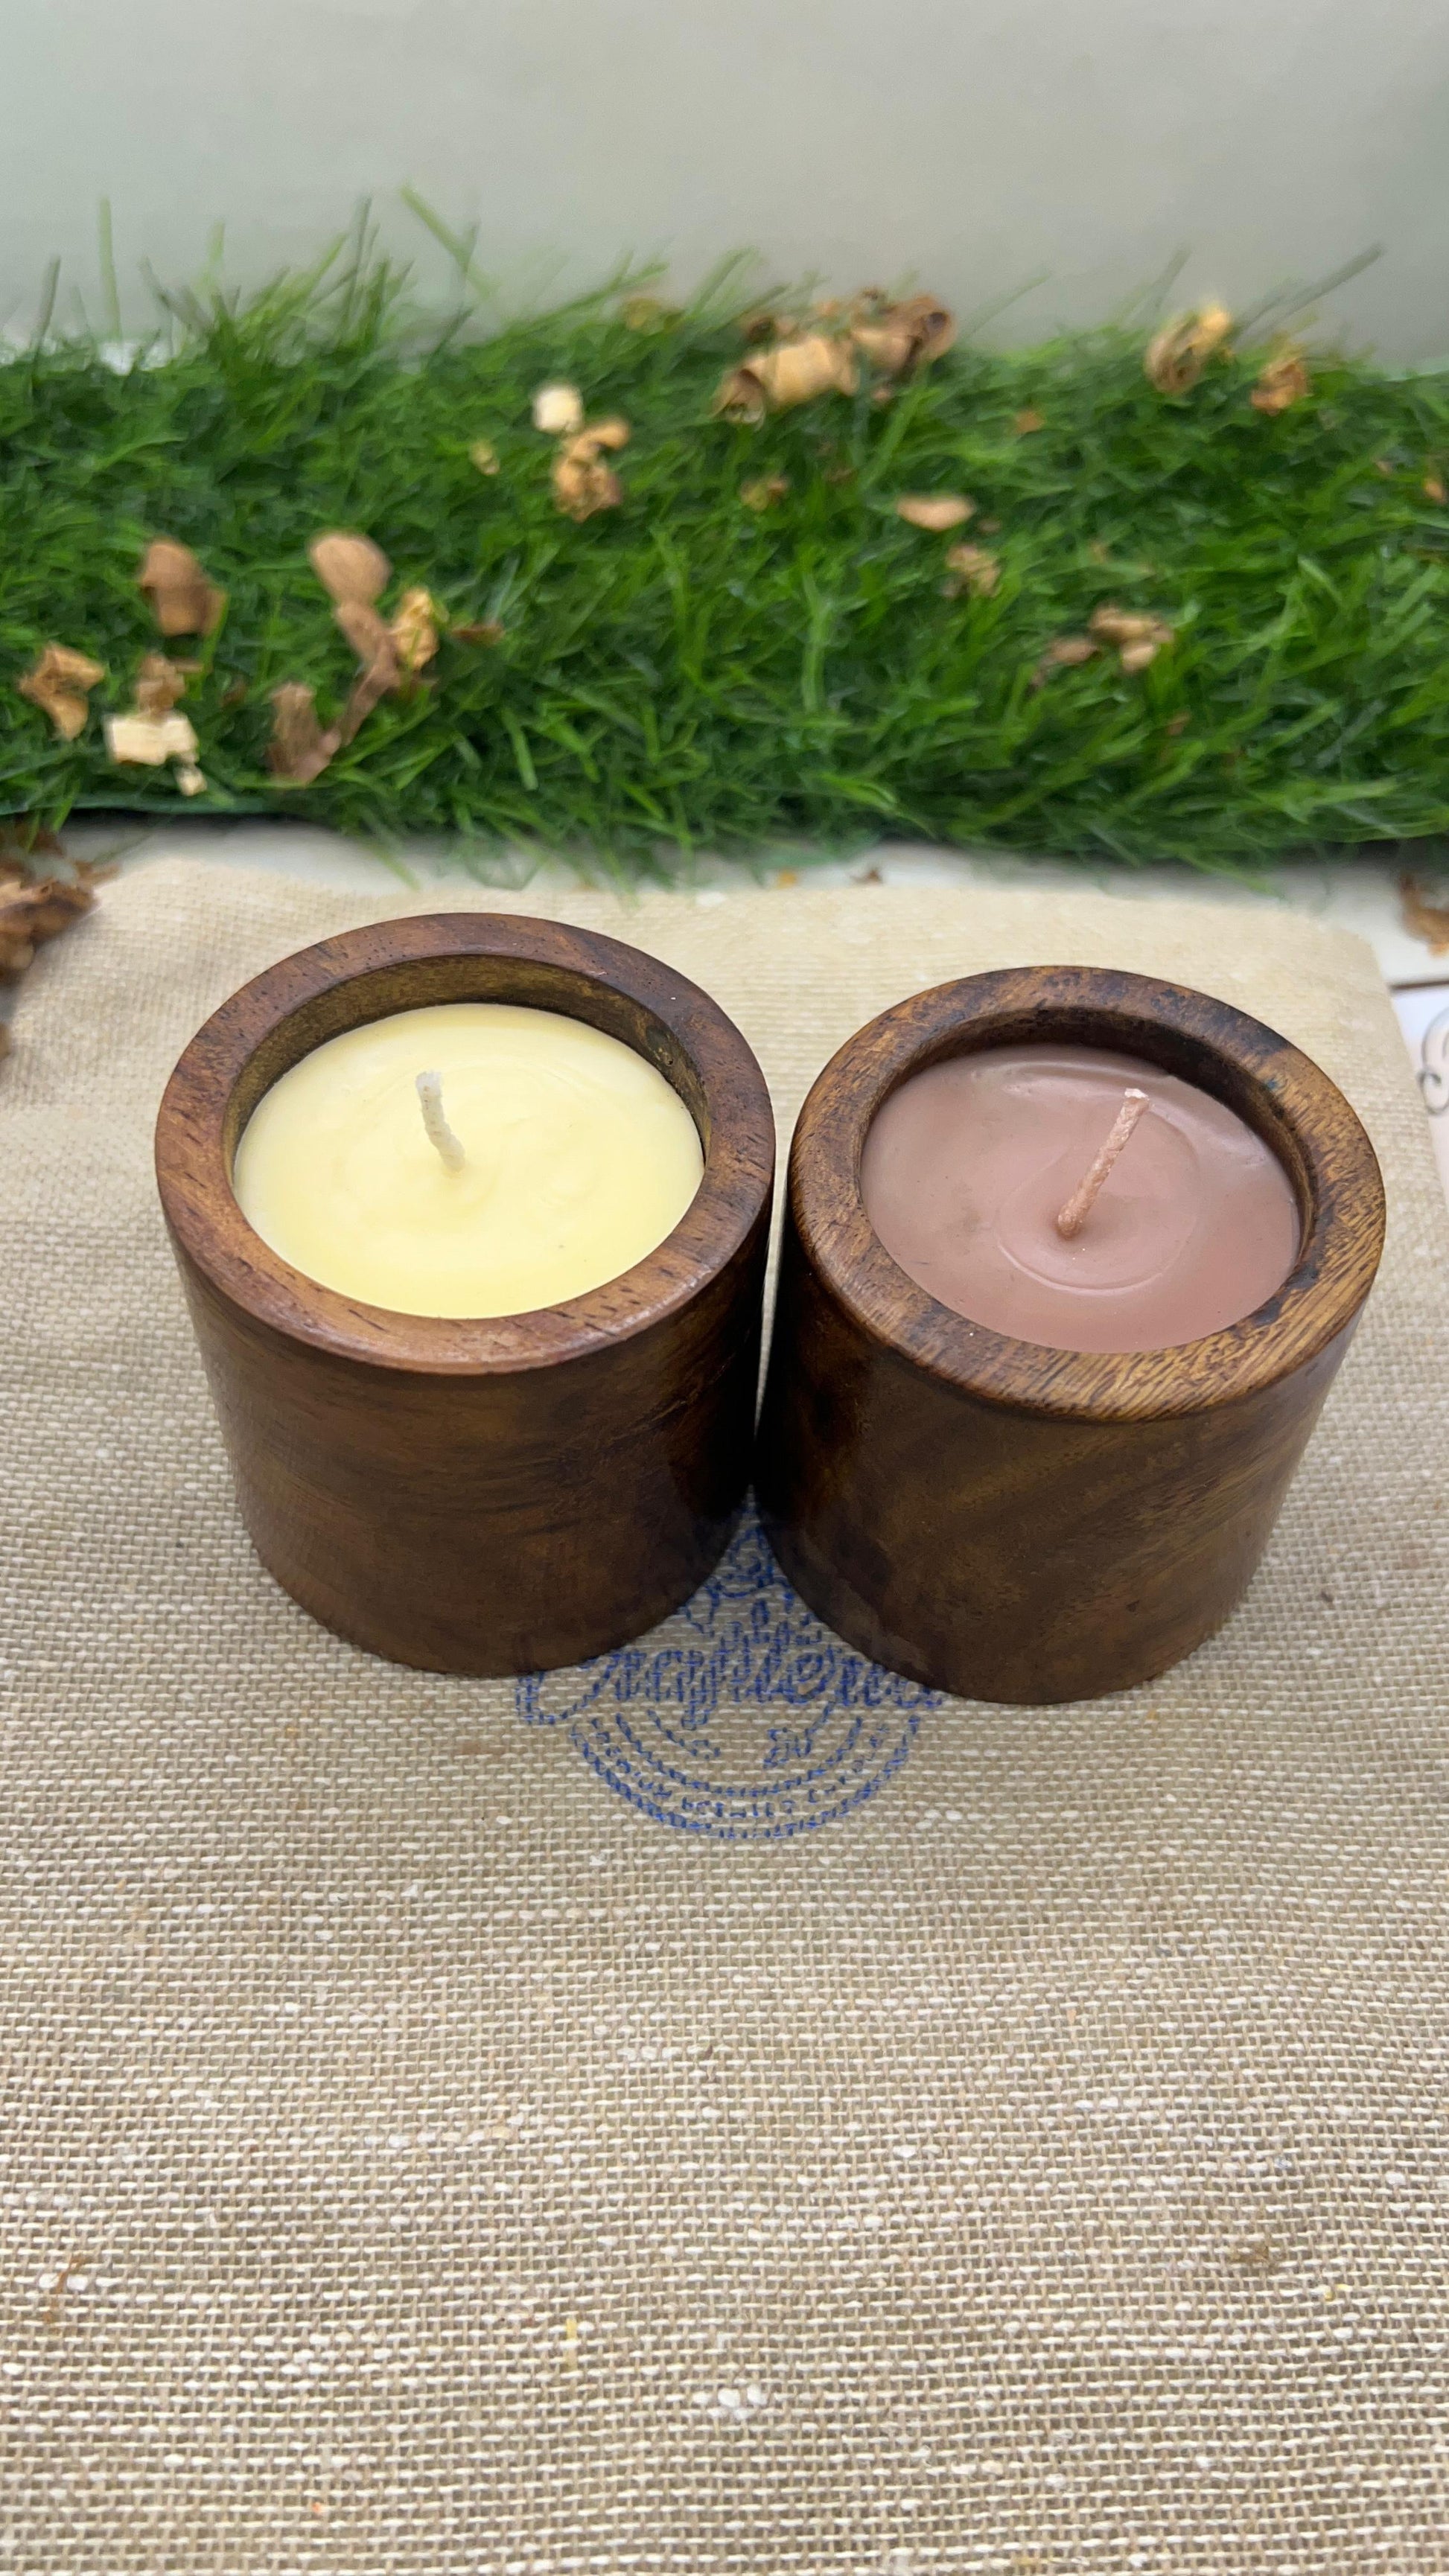 Antique Luxury Scented Aroma Candles - Mini Glass Shaped